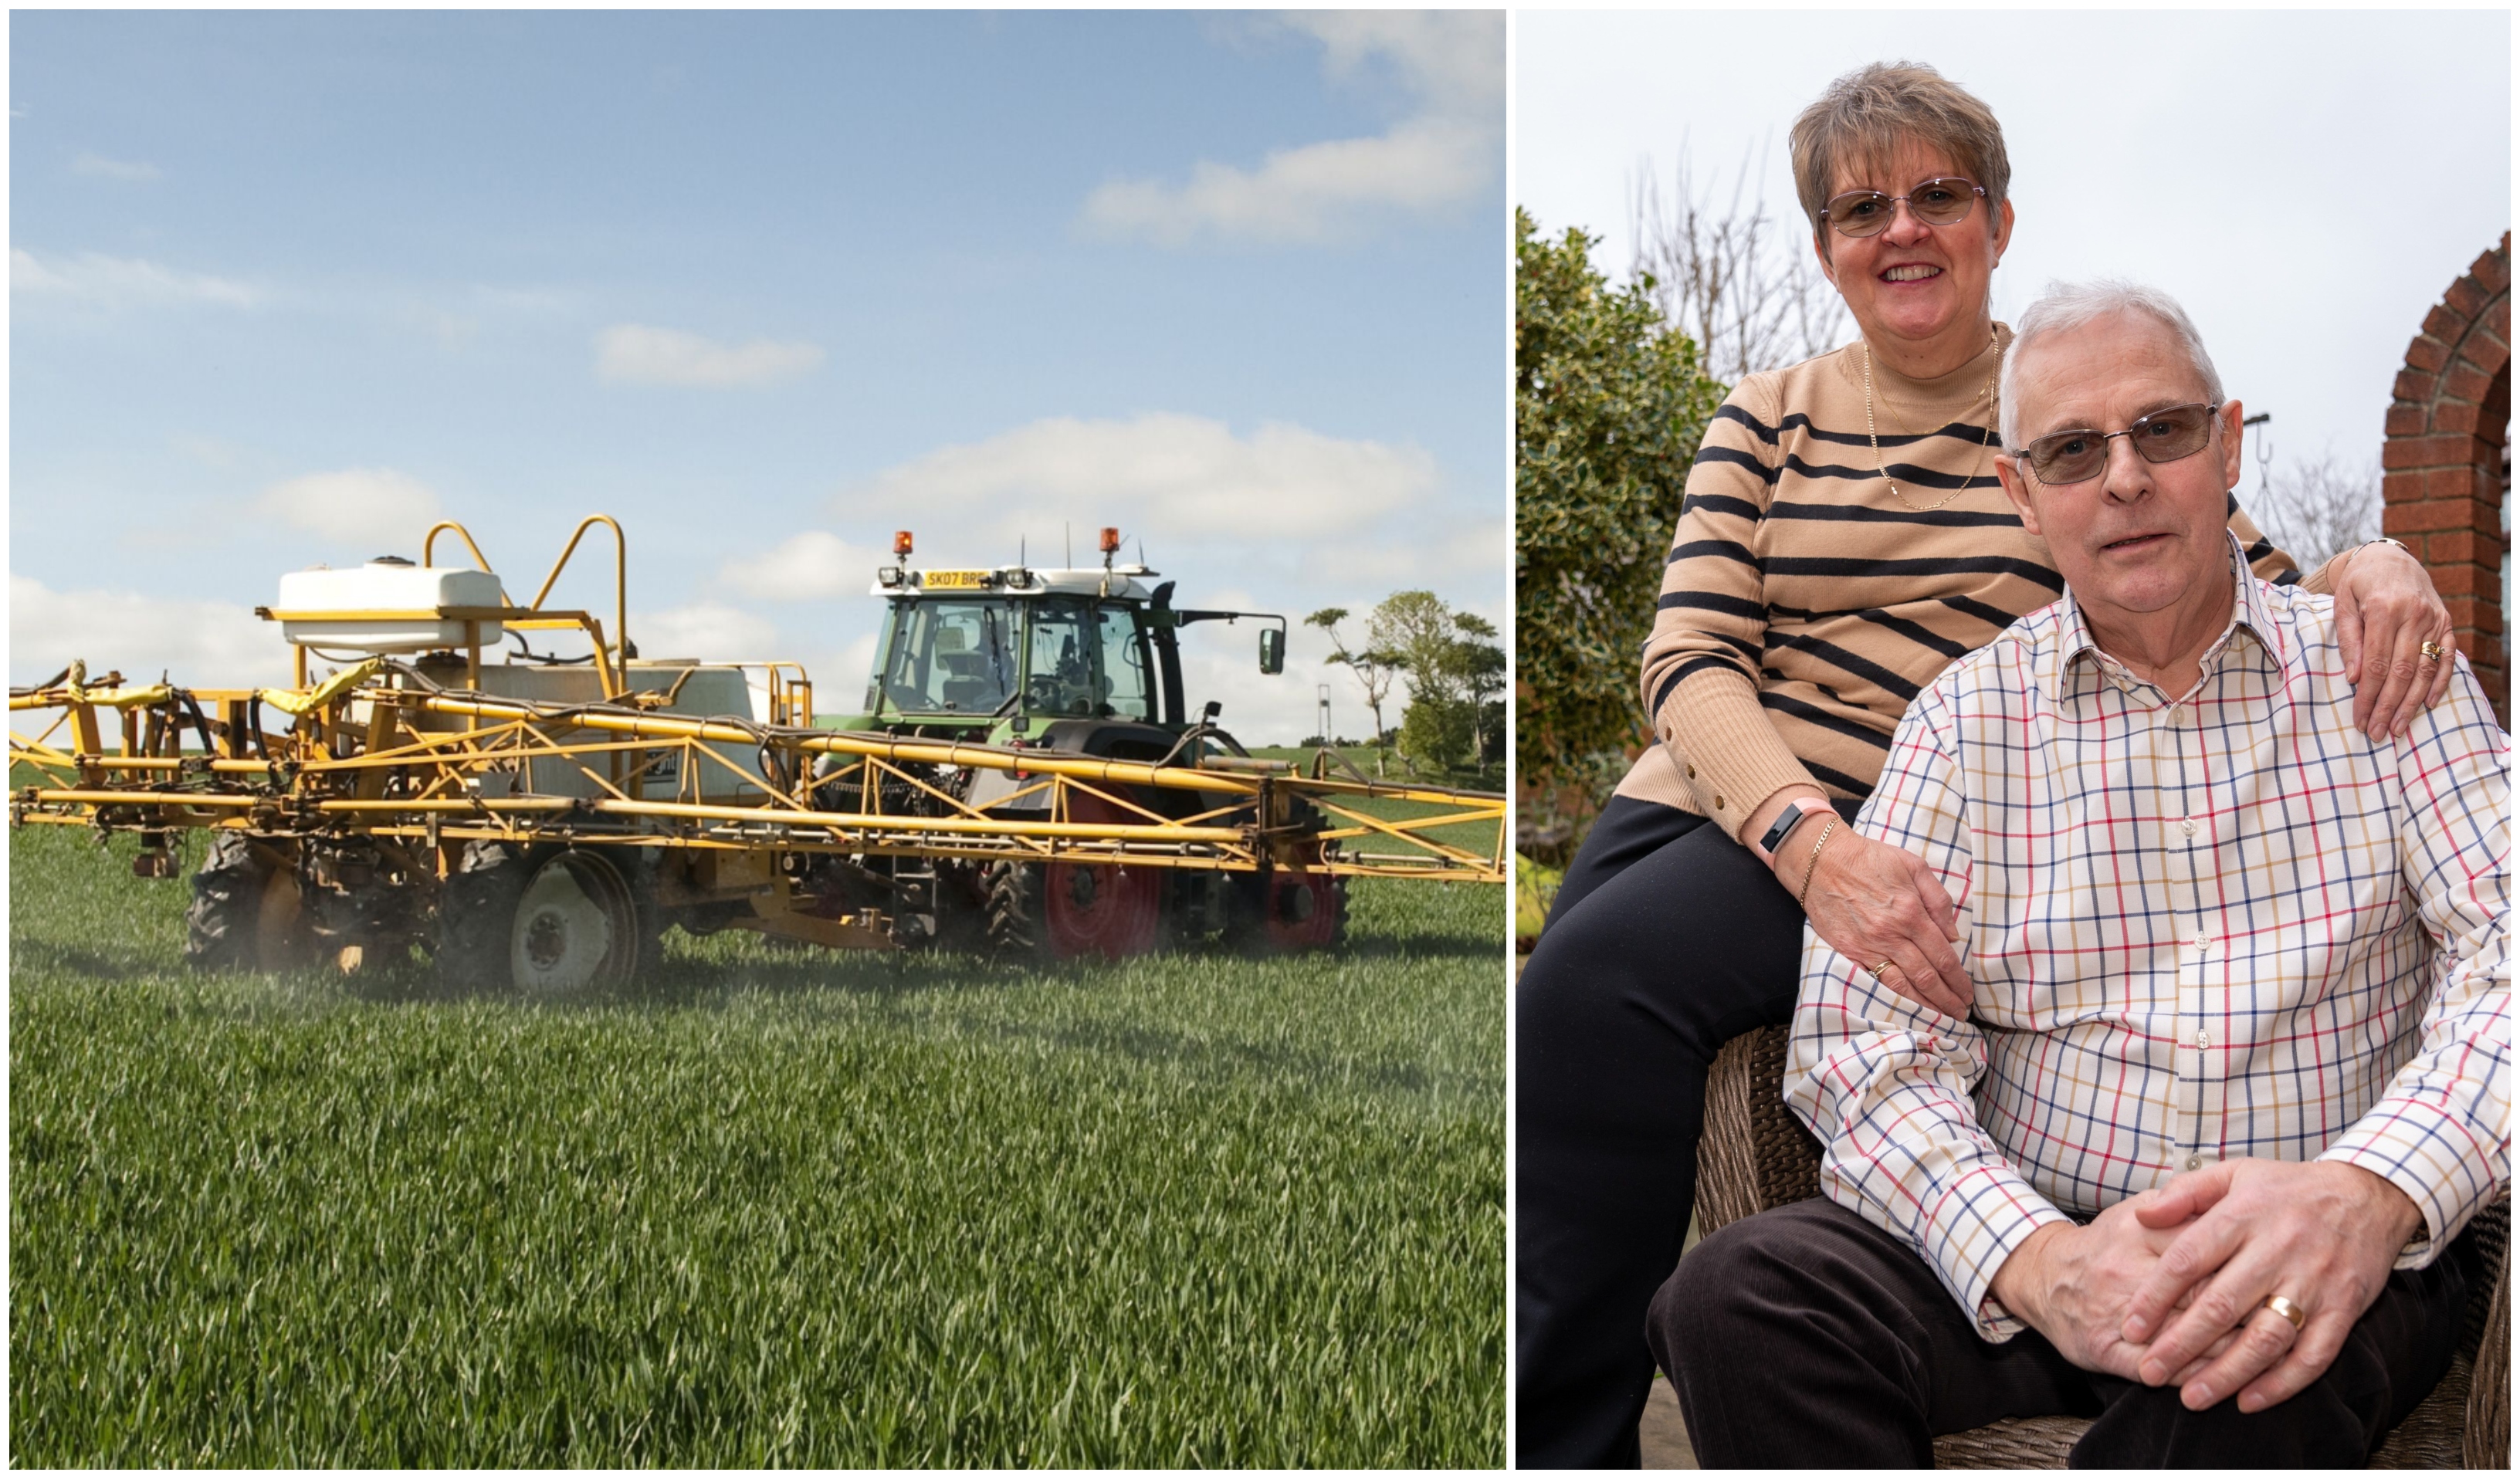 Iain Glen, who had breast cancer, and his wife May at home in East Whitburn, right, and left, a tractor sprays pesticides on a wheat field in North Berwick